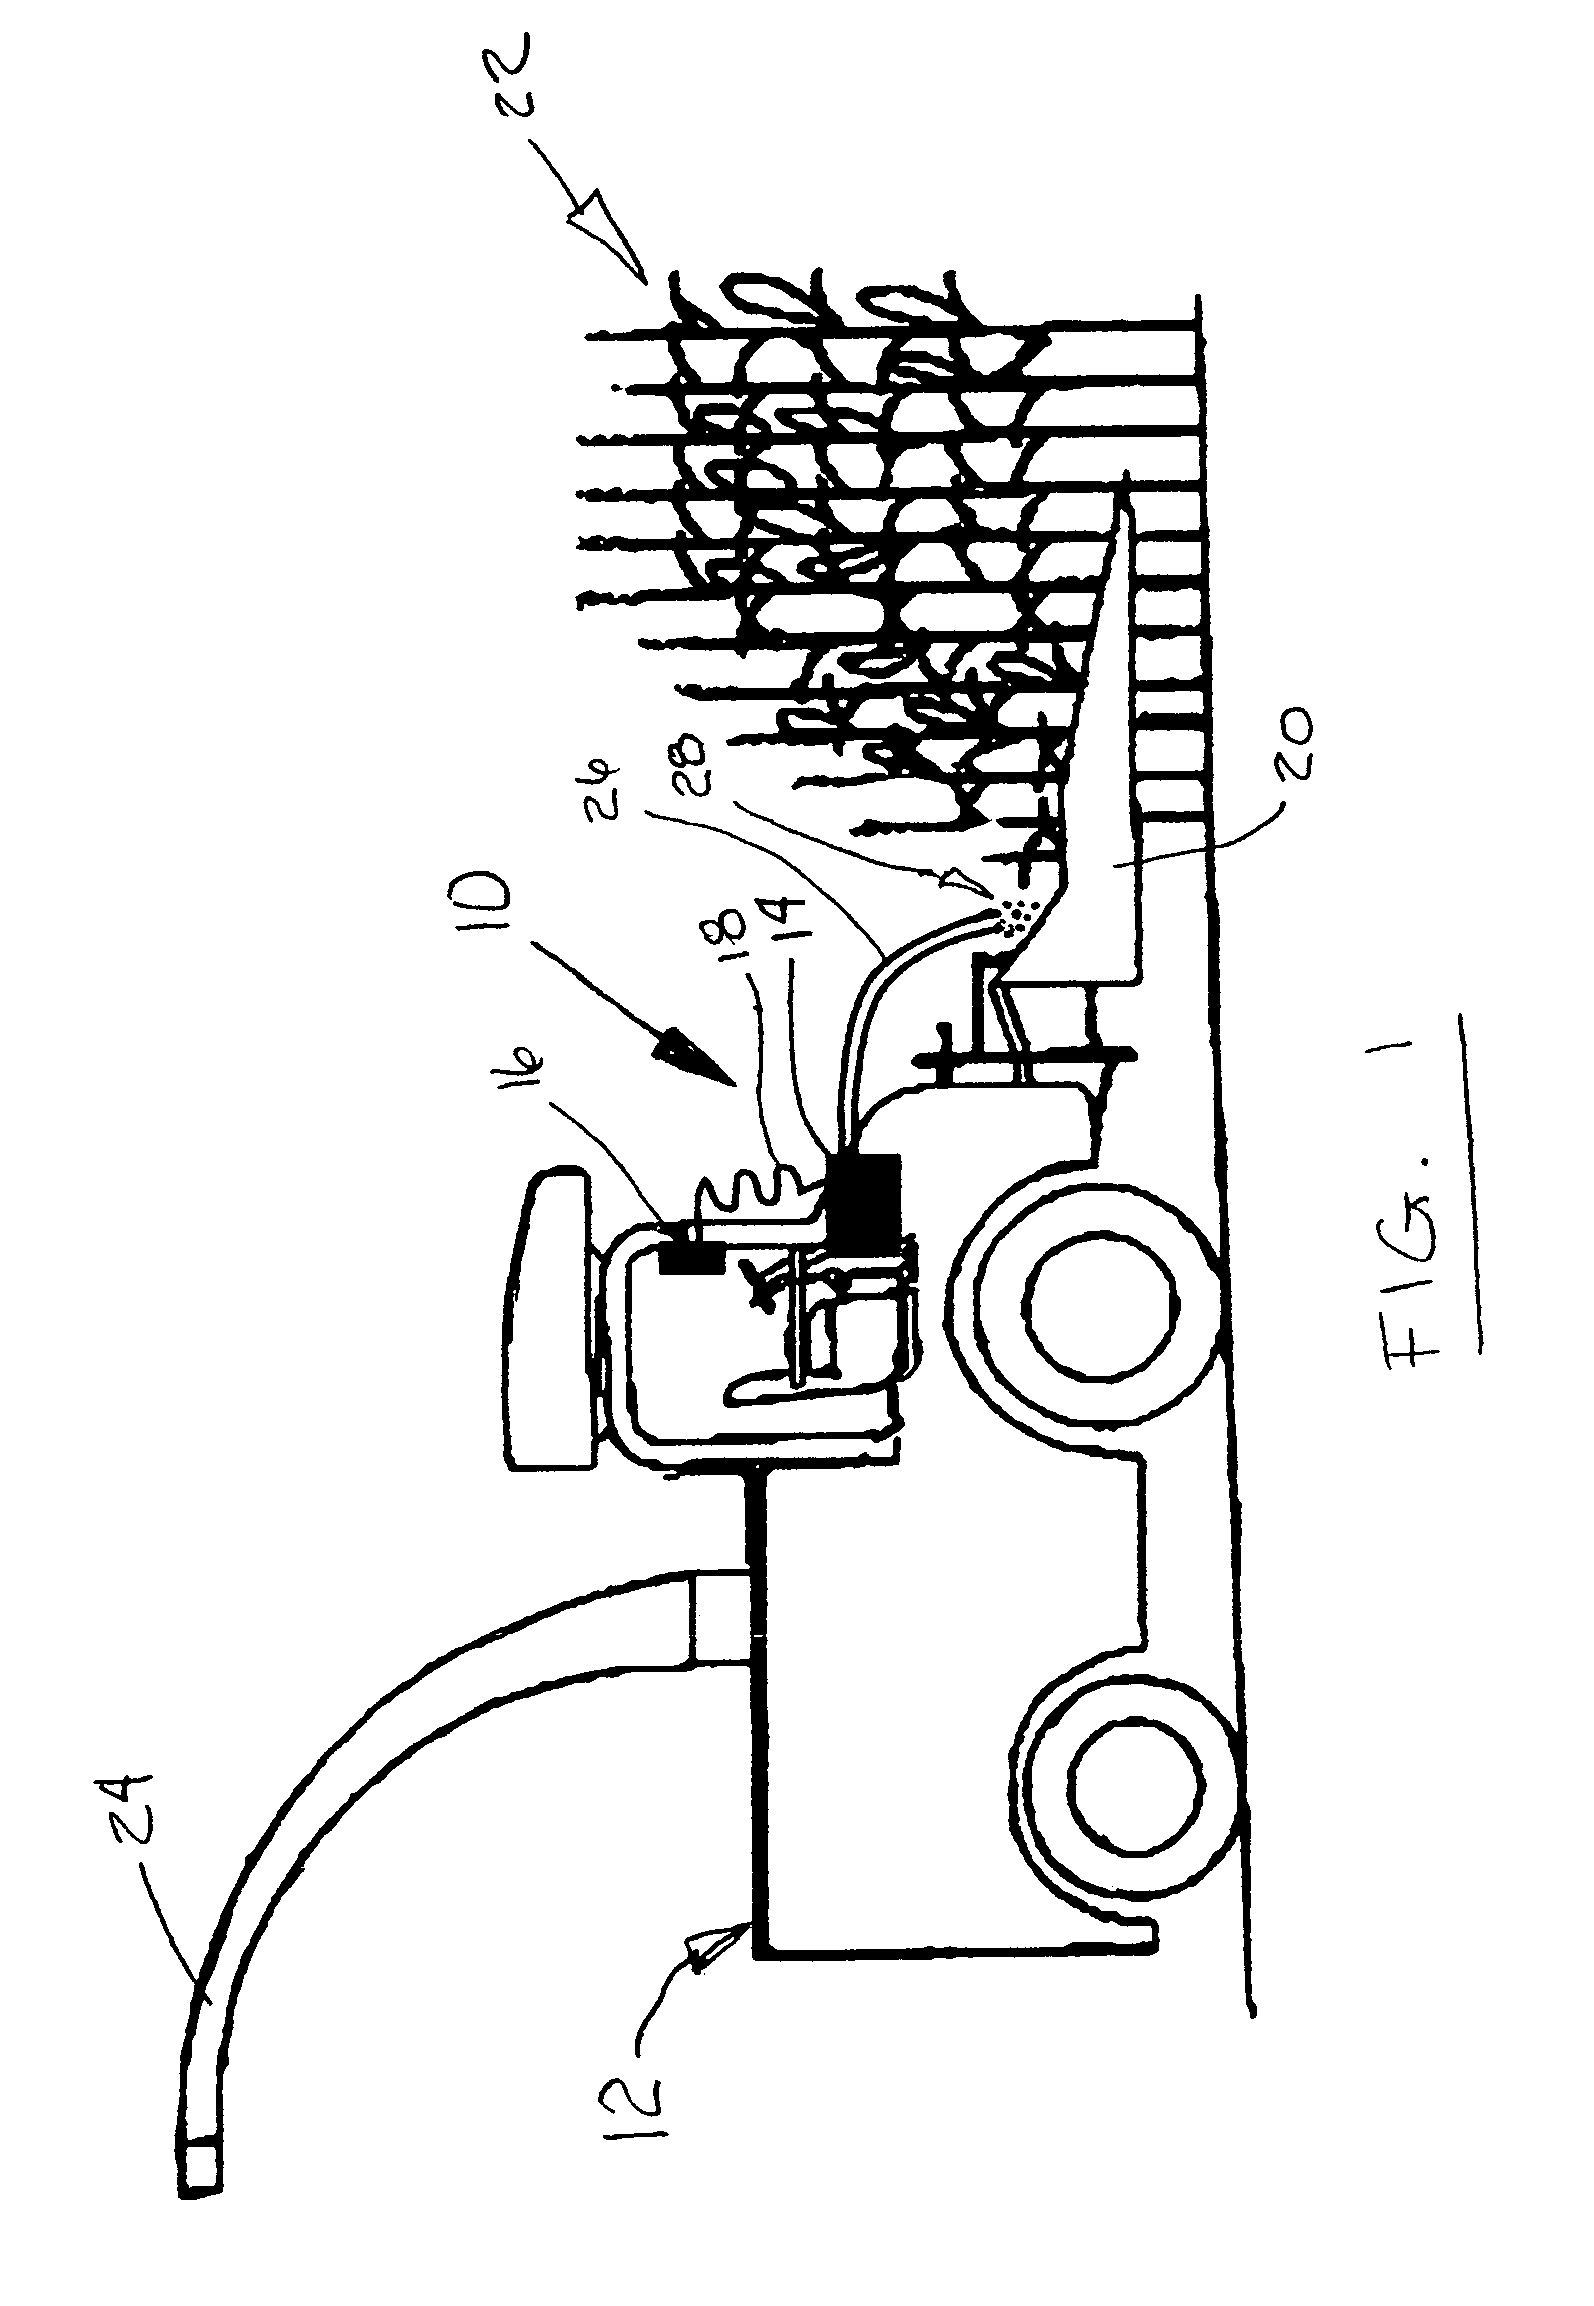 Apparatus and method for applying dry inoculant to forage material